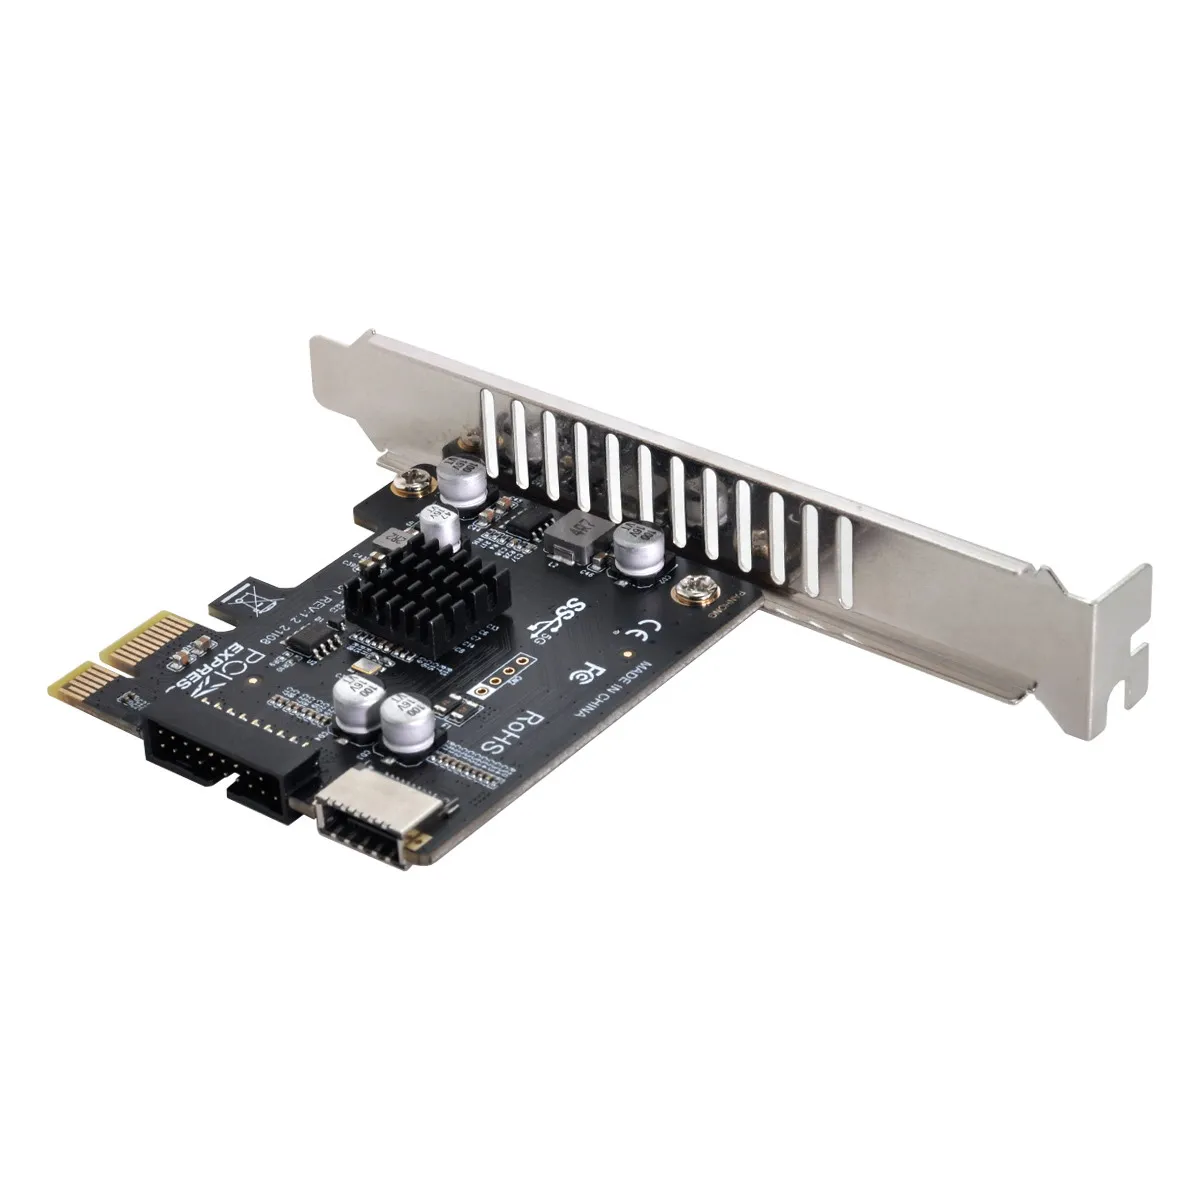 

Cablecc PCI-E 1X Express Adapter 5Gbps Type-E USB 3.1 Front Panel Socket & USB 2.0 to